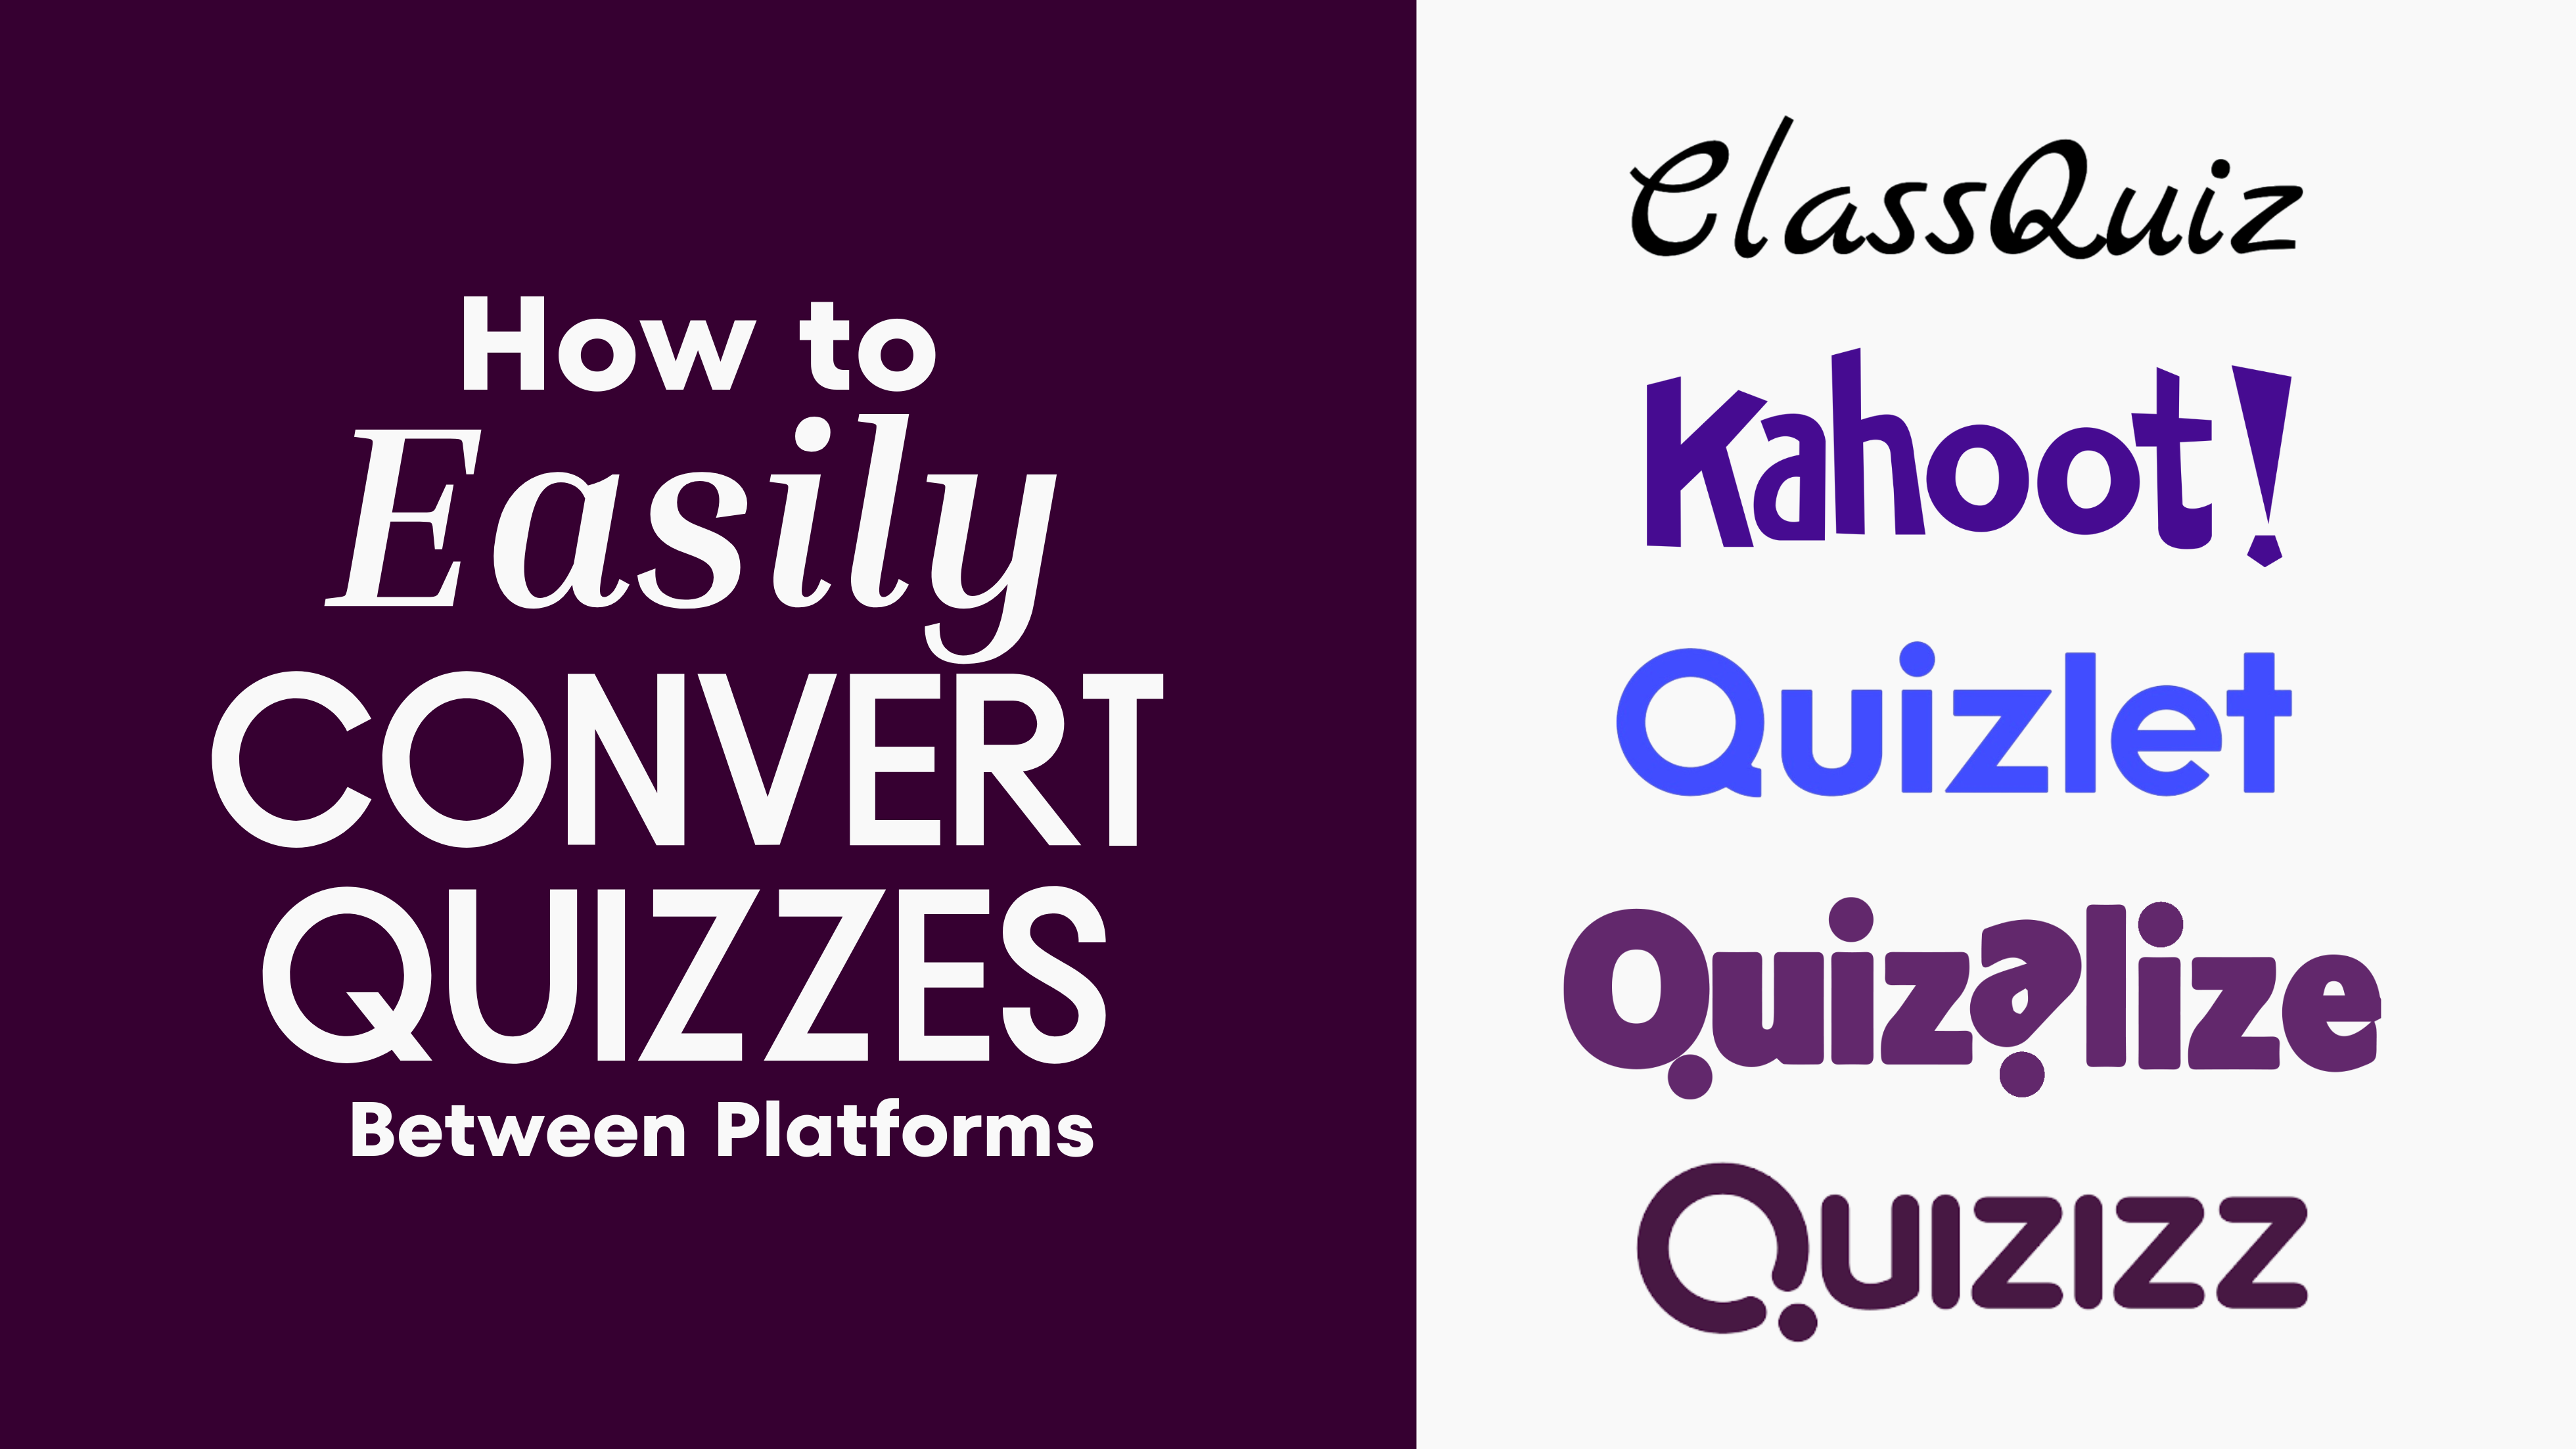 The Different Question Types on Quizizz for Work – Quizizz for Work